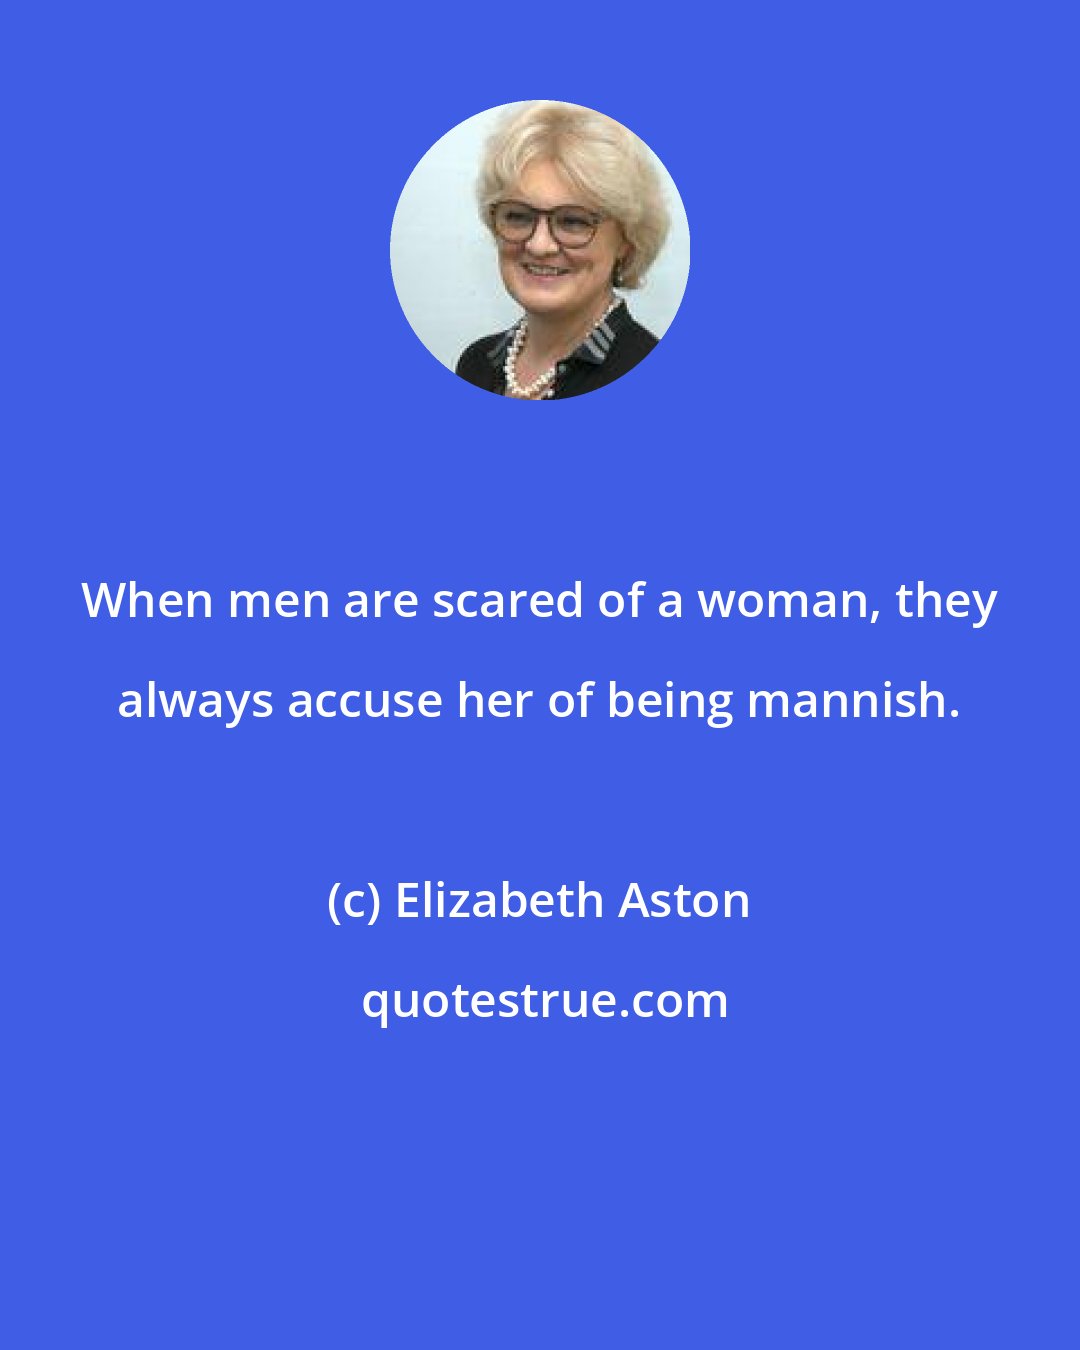 Elizabeth Aston: When men are scared of a woman, they always accuse her of being mannish.